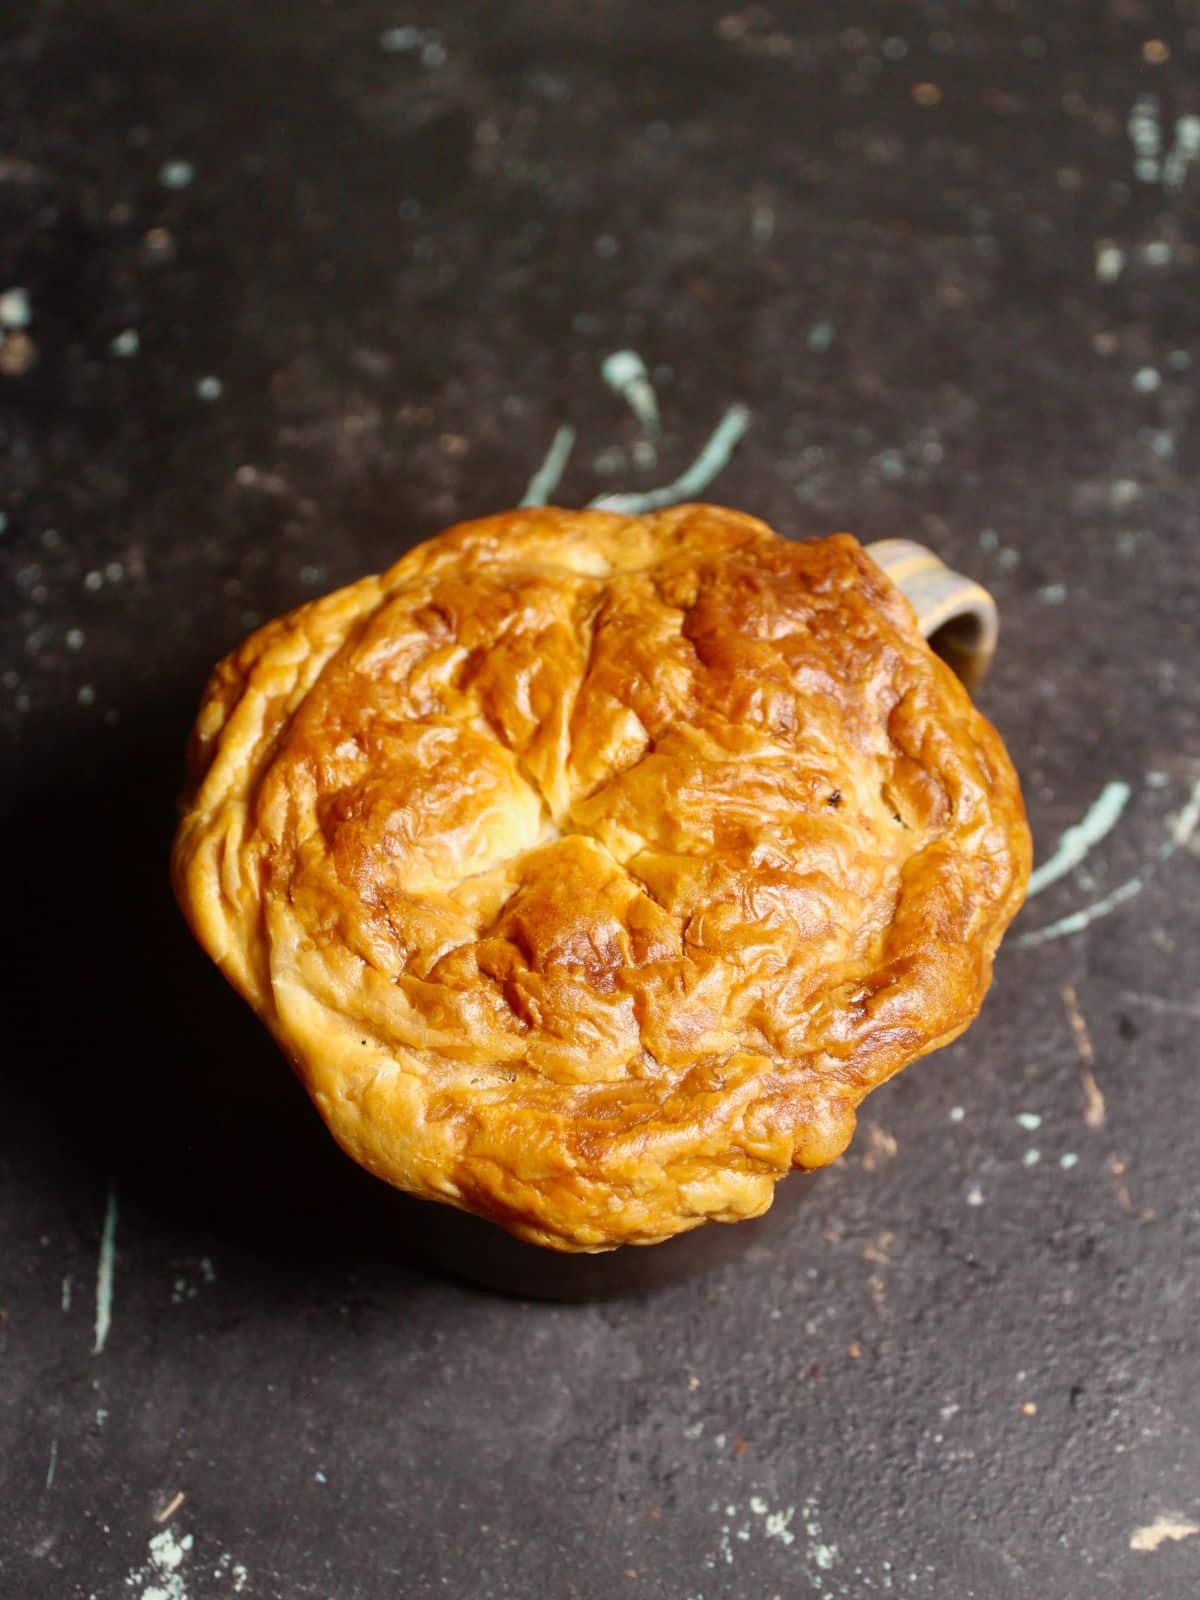 Your Indian Spiced Lamb and Vegetable Pies in a Cup is ready to enjoy 